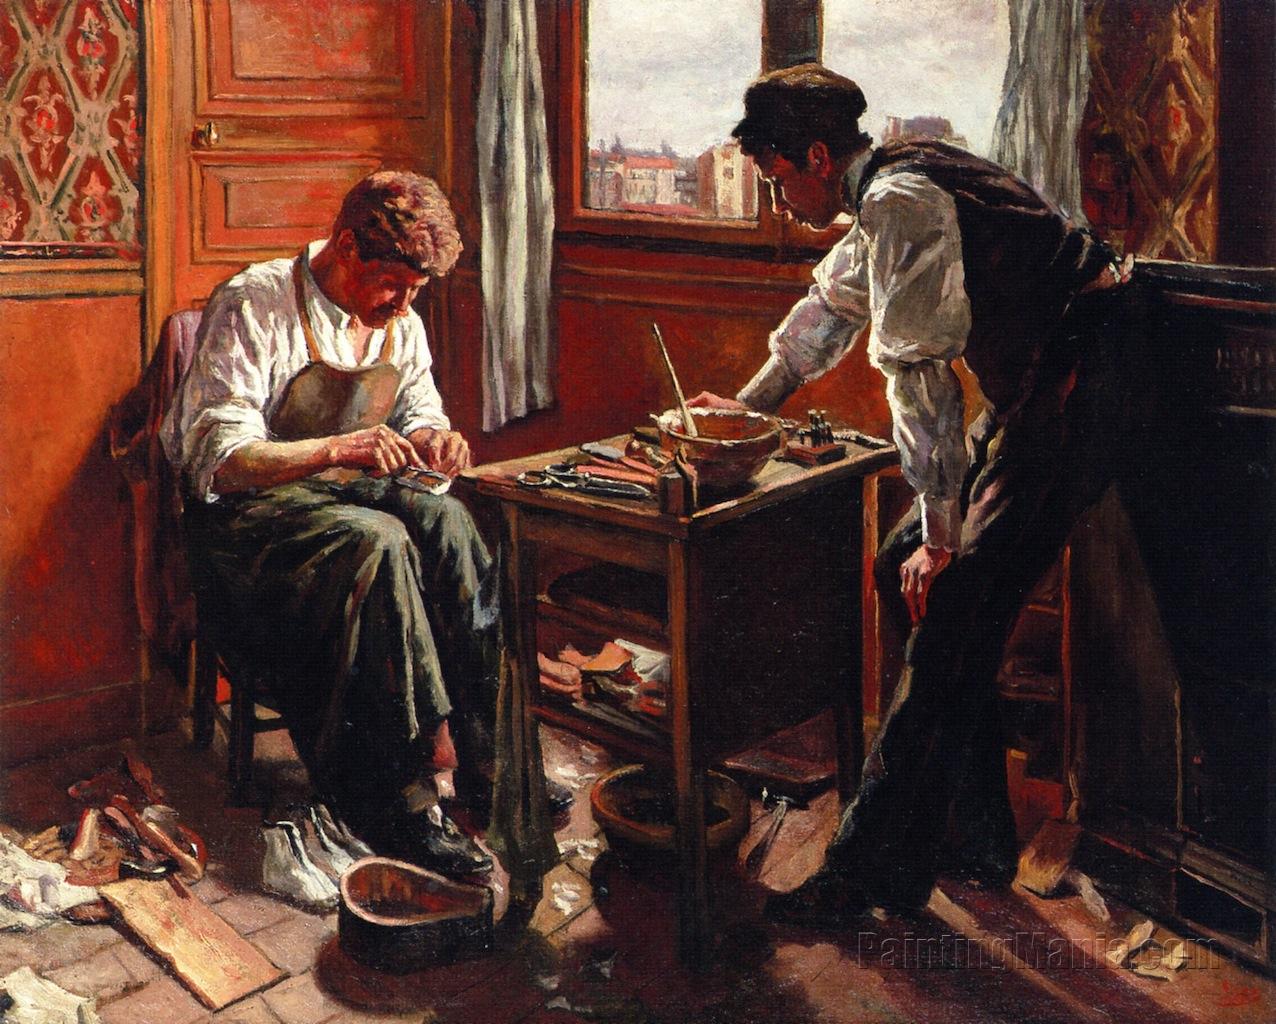 The Shoemaker, the Two Givort Brothers